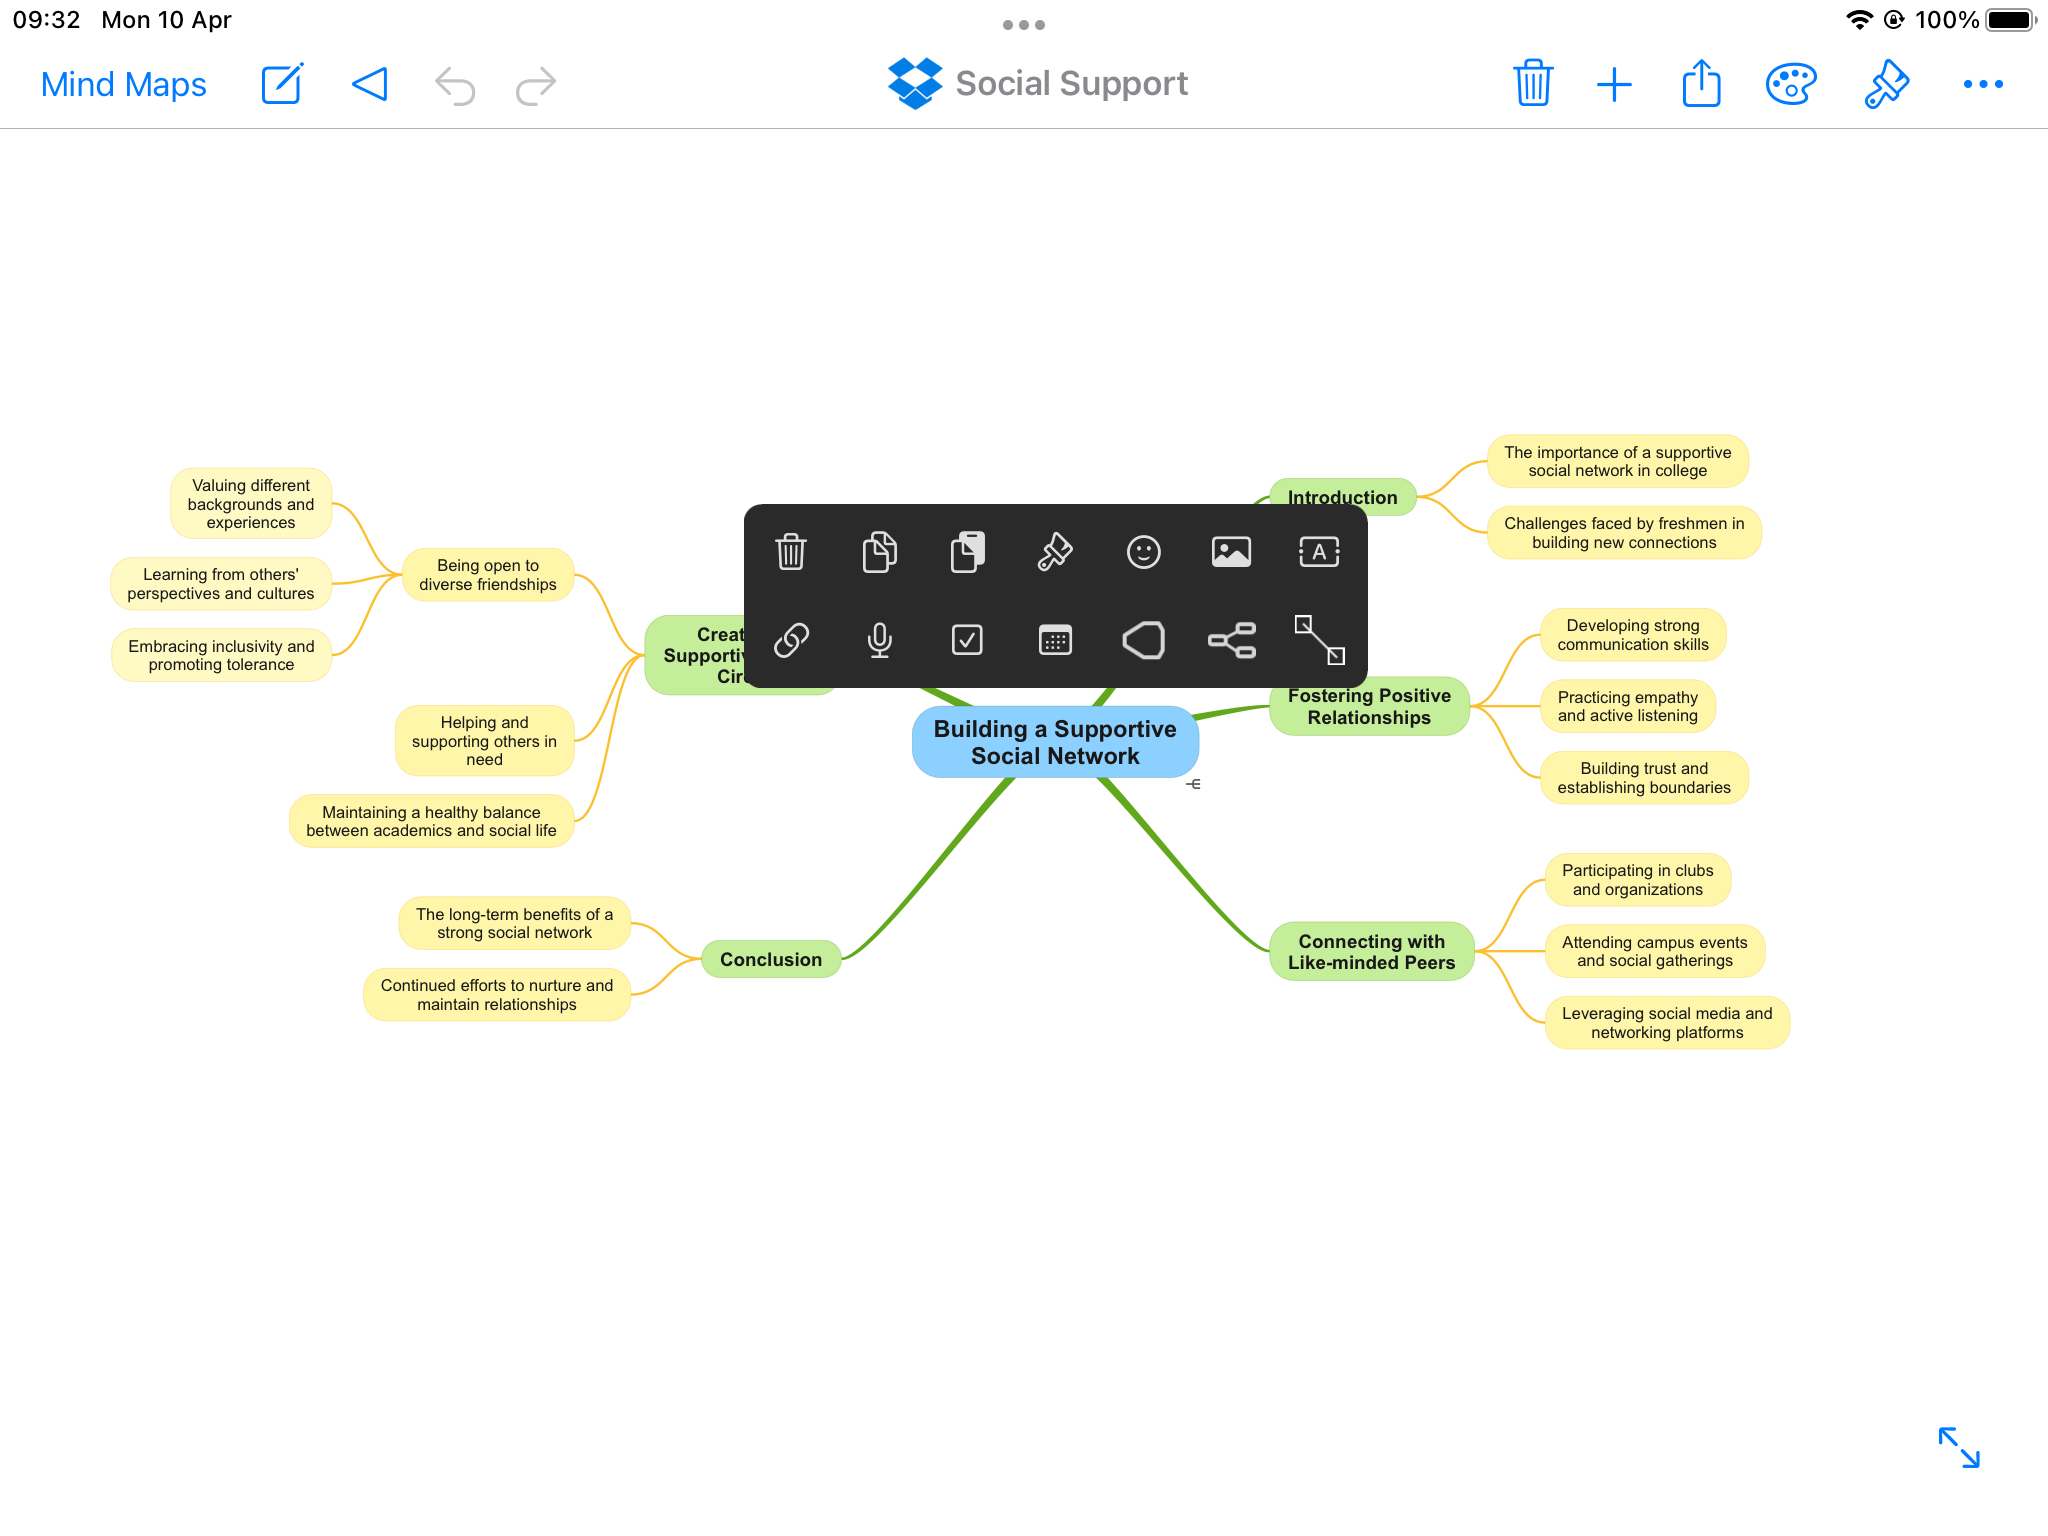 Show menu on Mind Map Root